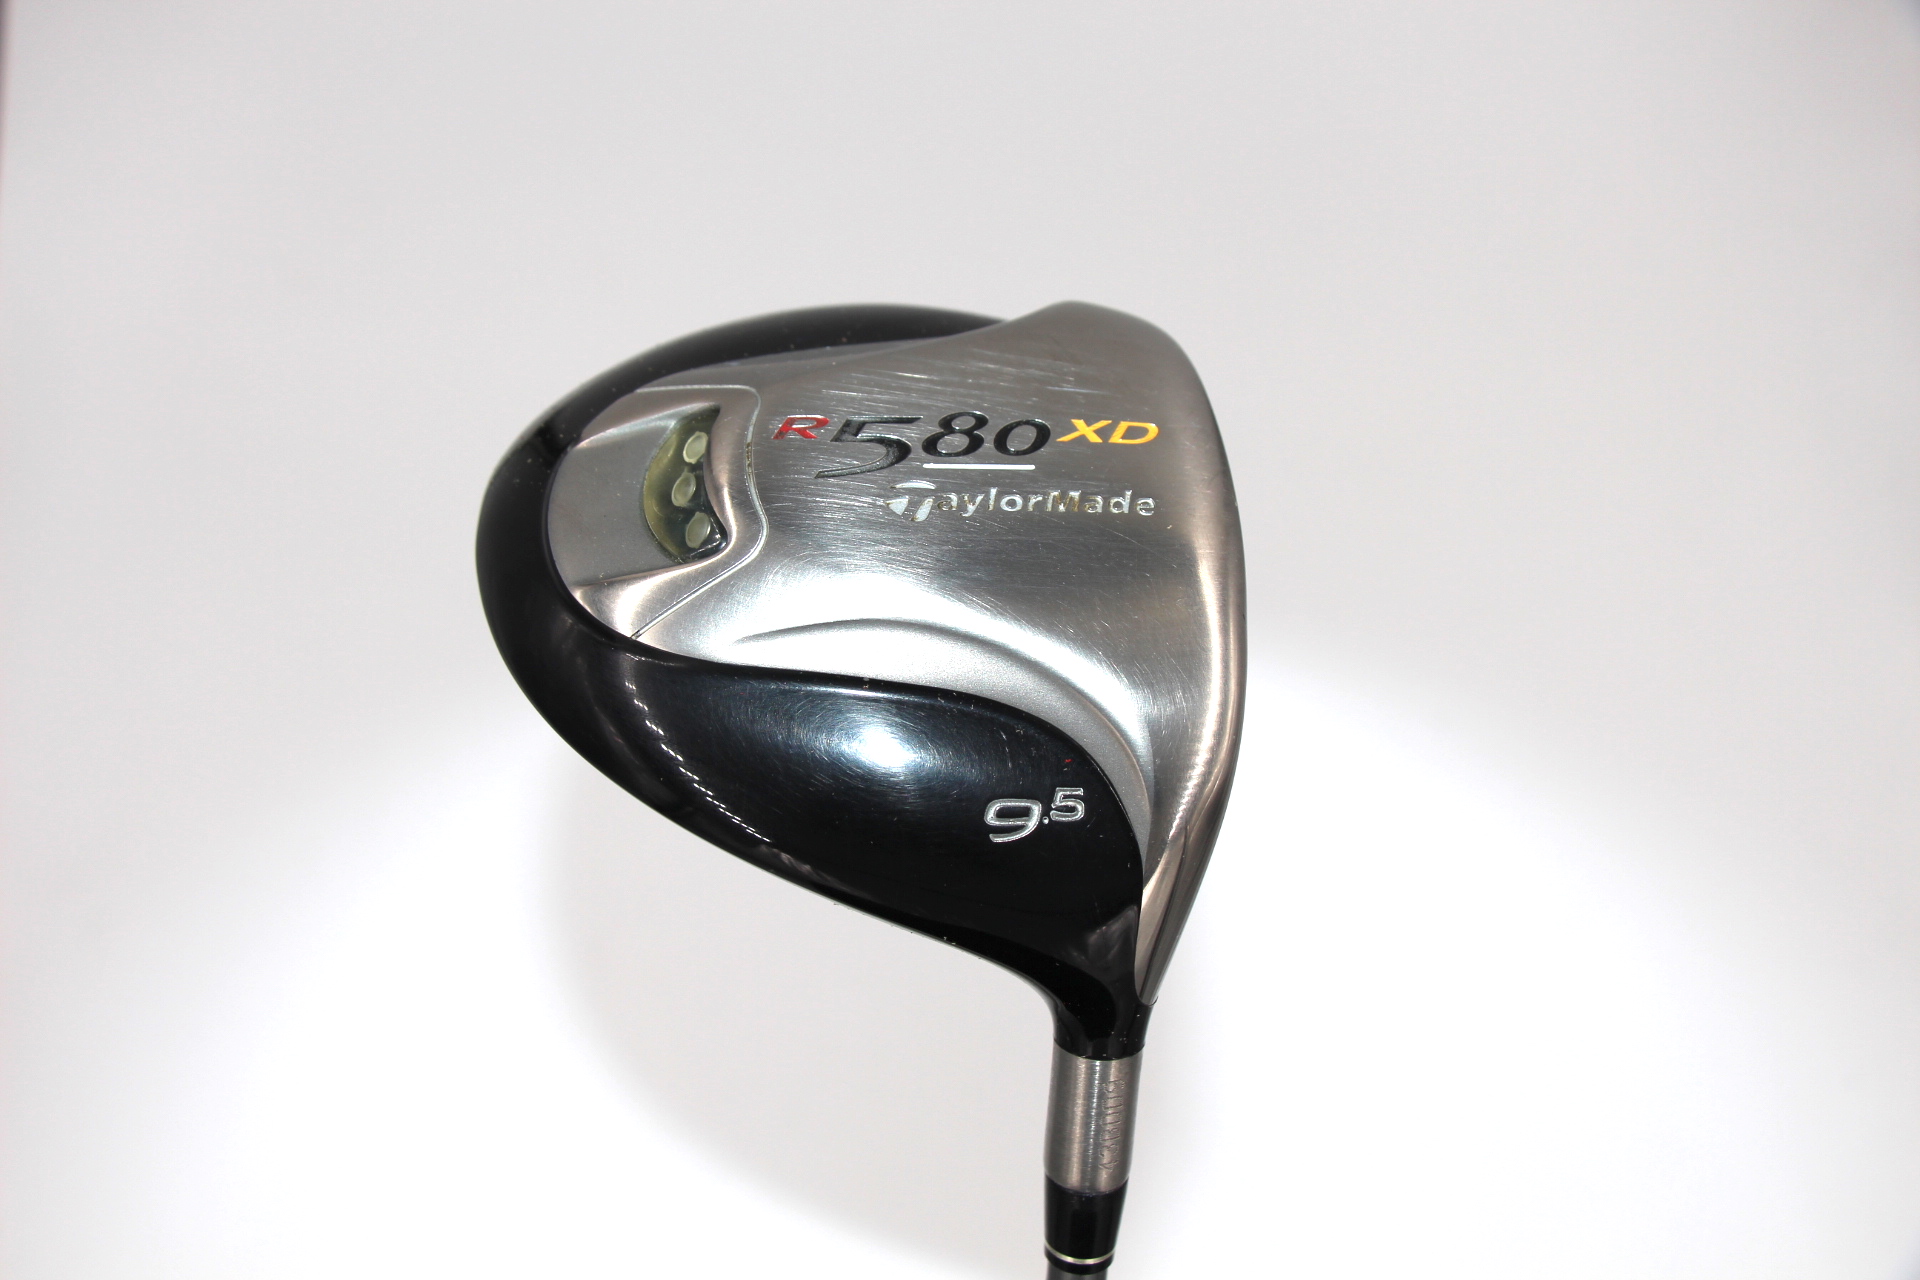 taylormade 580 driver review